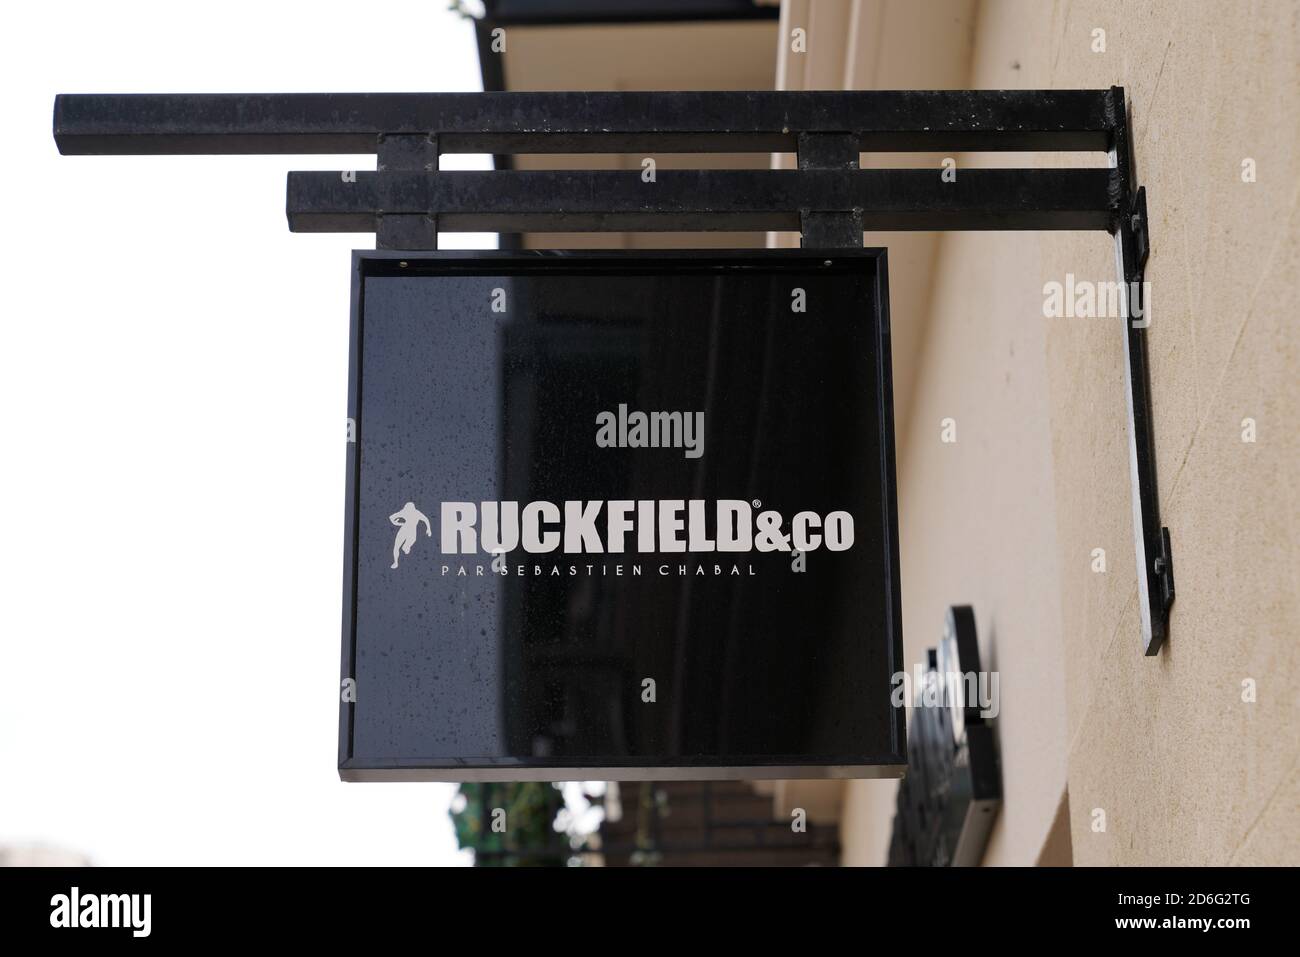 Bordeaux , Aquitaine / France - 10 10 2020 : ruckfield & co logo text and shop sign of rugby sport clothes fashion store Stock Photo